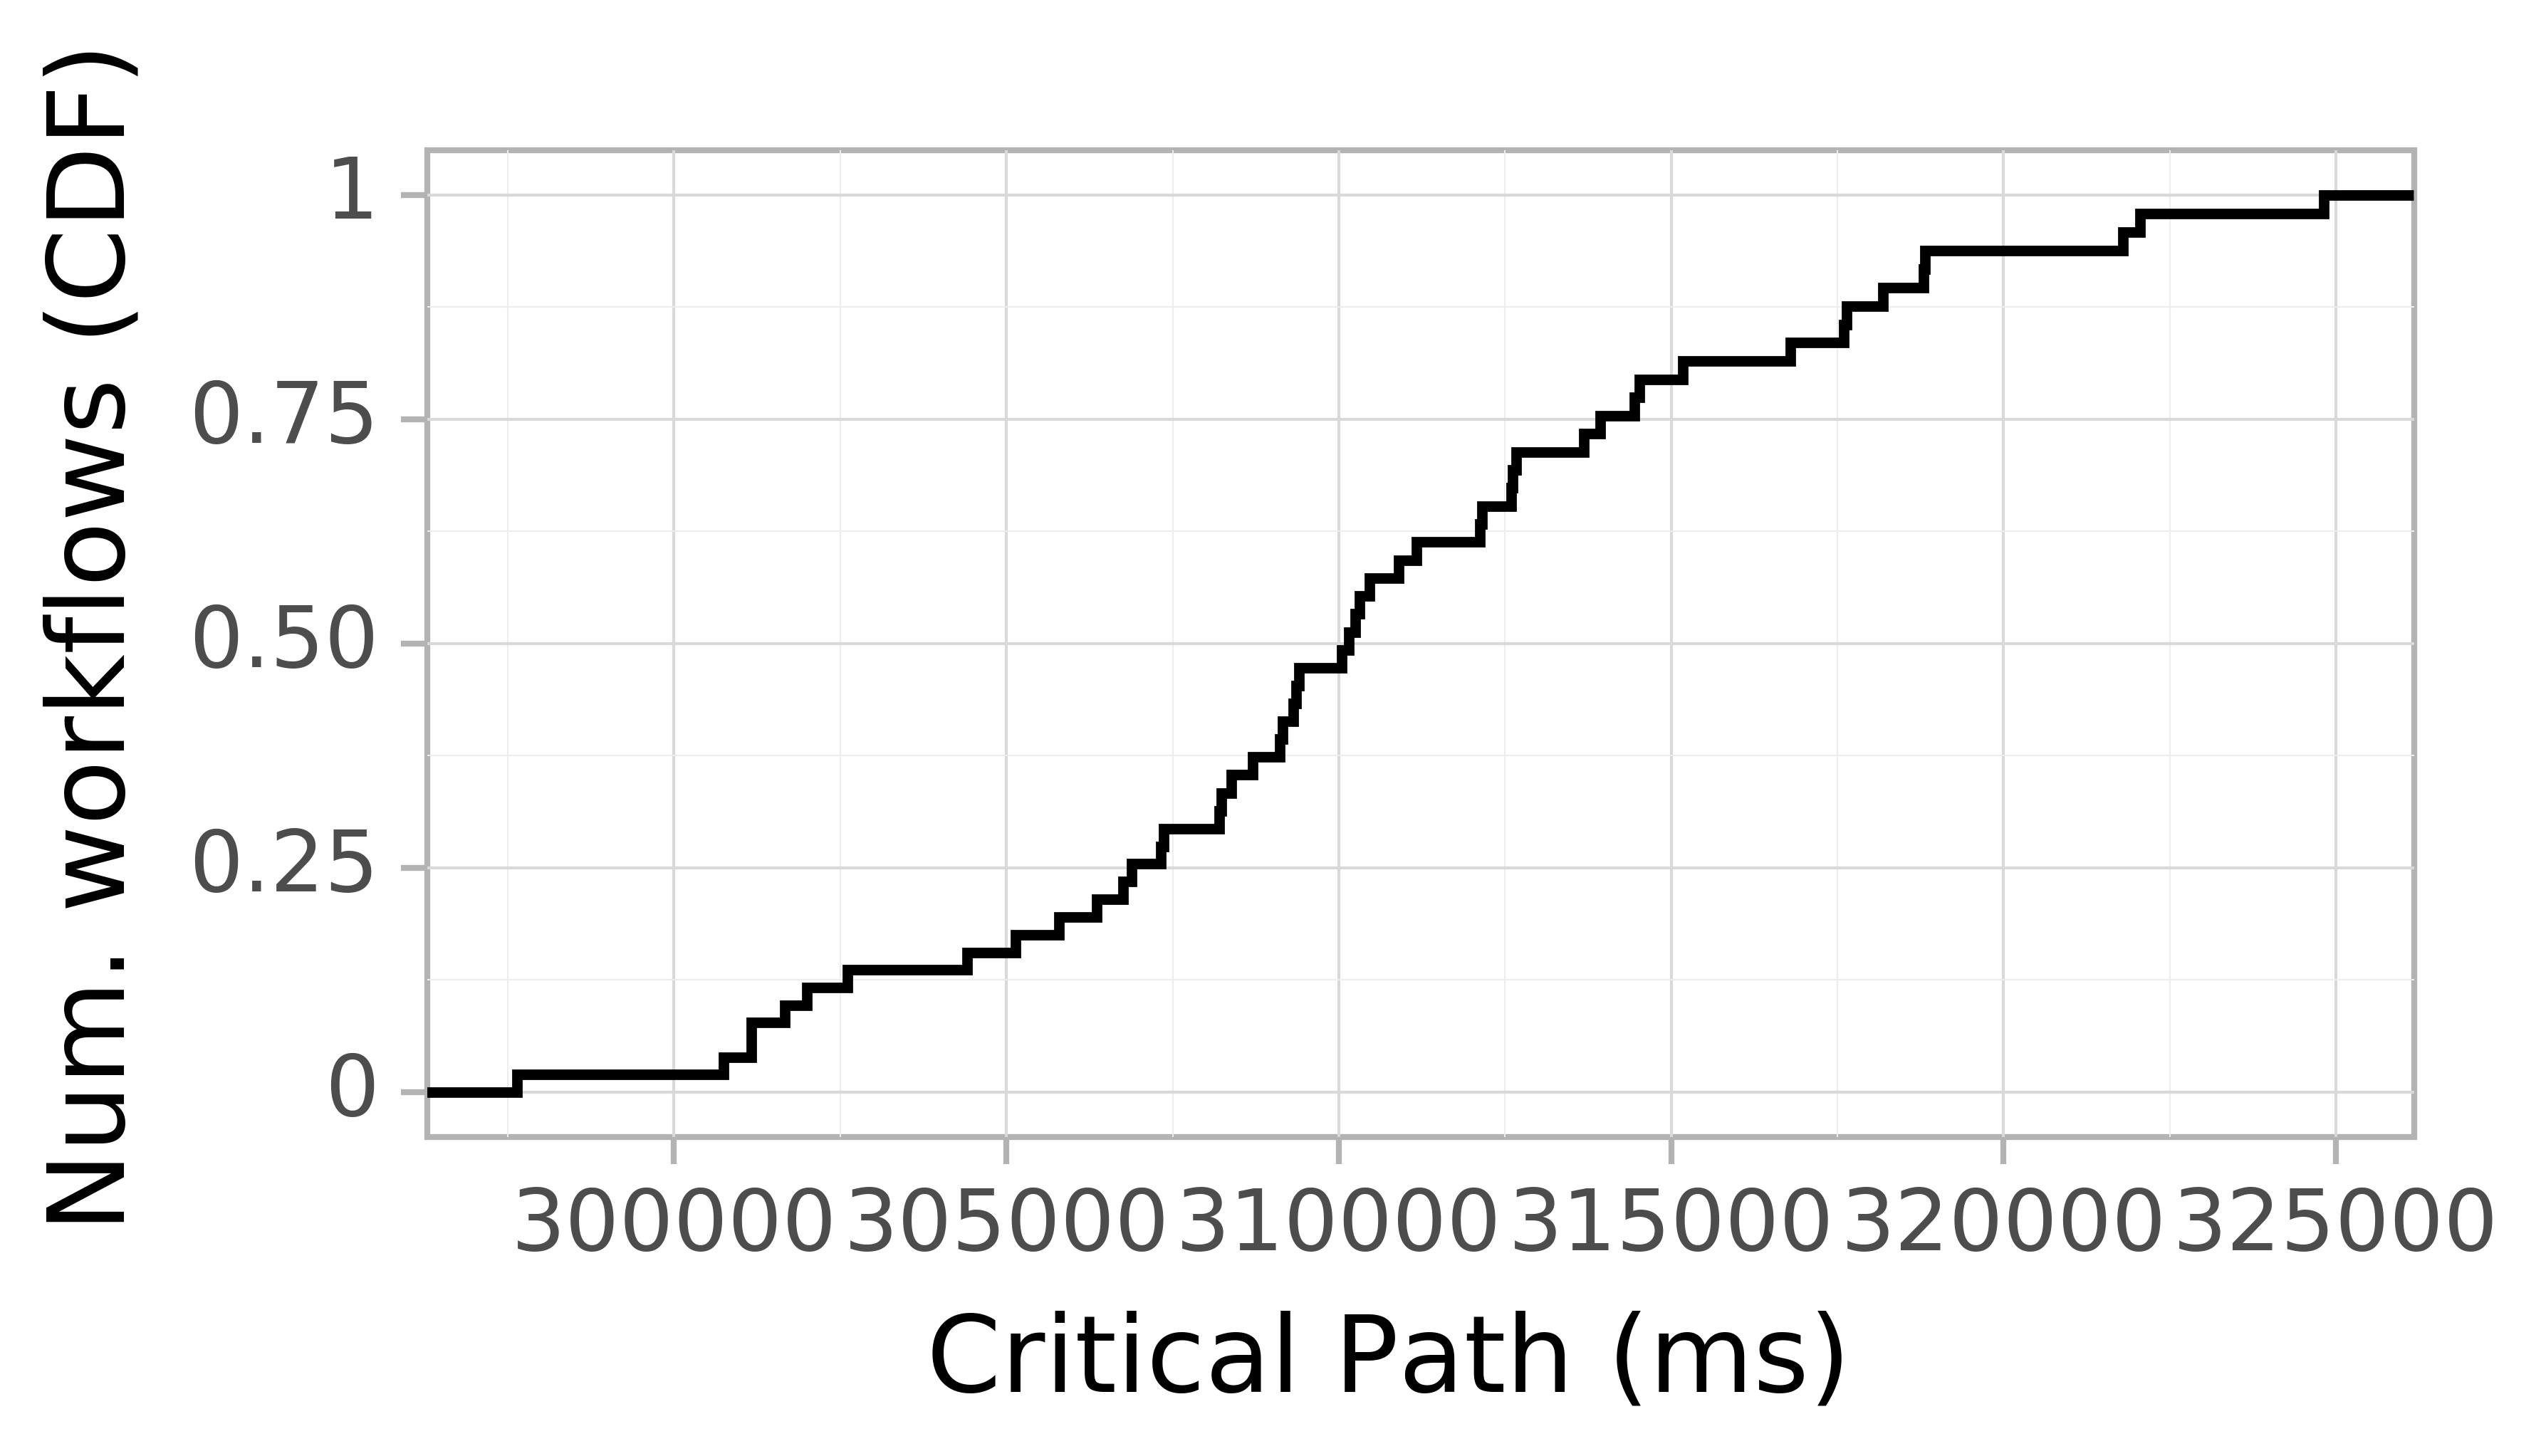 Job runtime CDF graph for the askalon-new_ee50 trace.